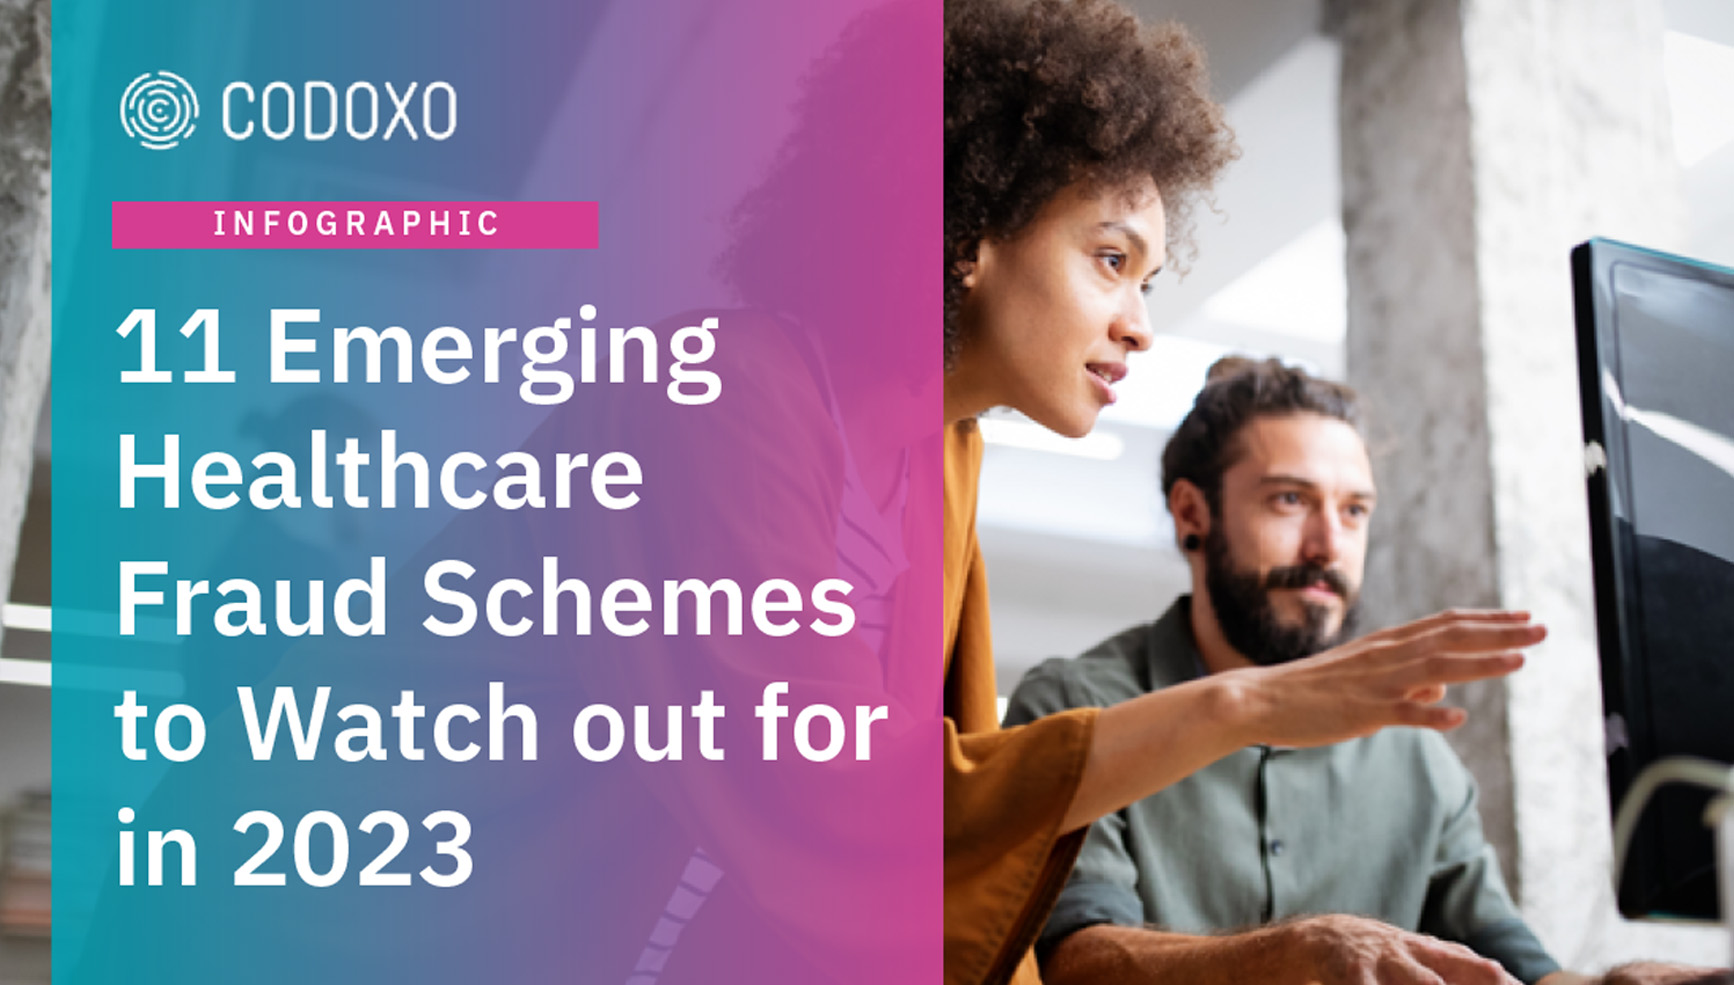 Codoxo infographic 11 Healthcare Fraud Schemes to Watch out for in 2023